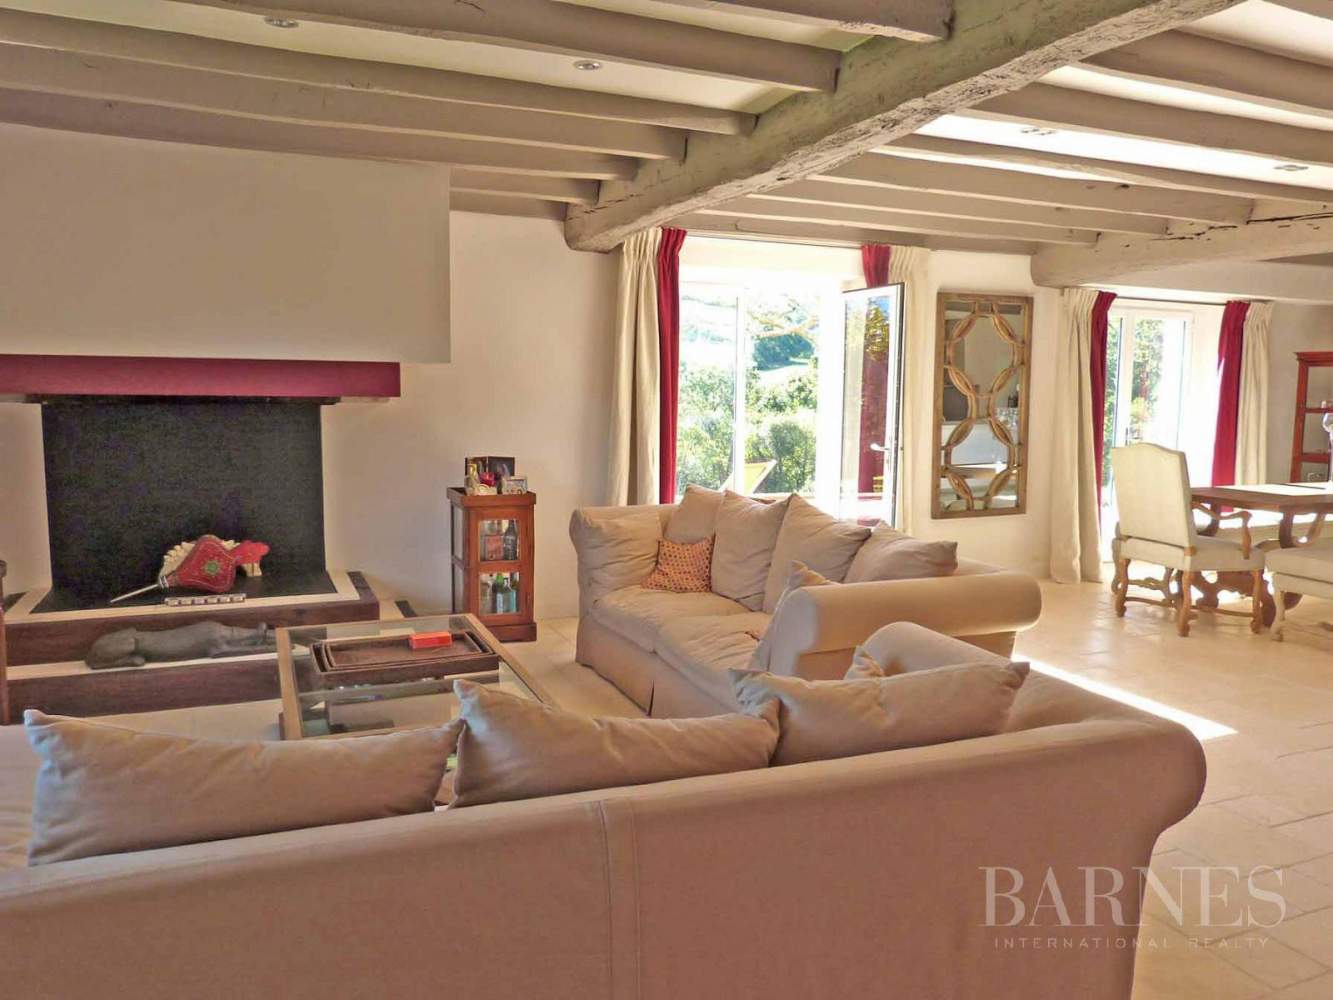 Near Saint Jean de Luz, renovated basque farmhouse with heated swimming-pool and tennis court, beautiful view, terraces, quiet area picture 2